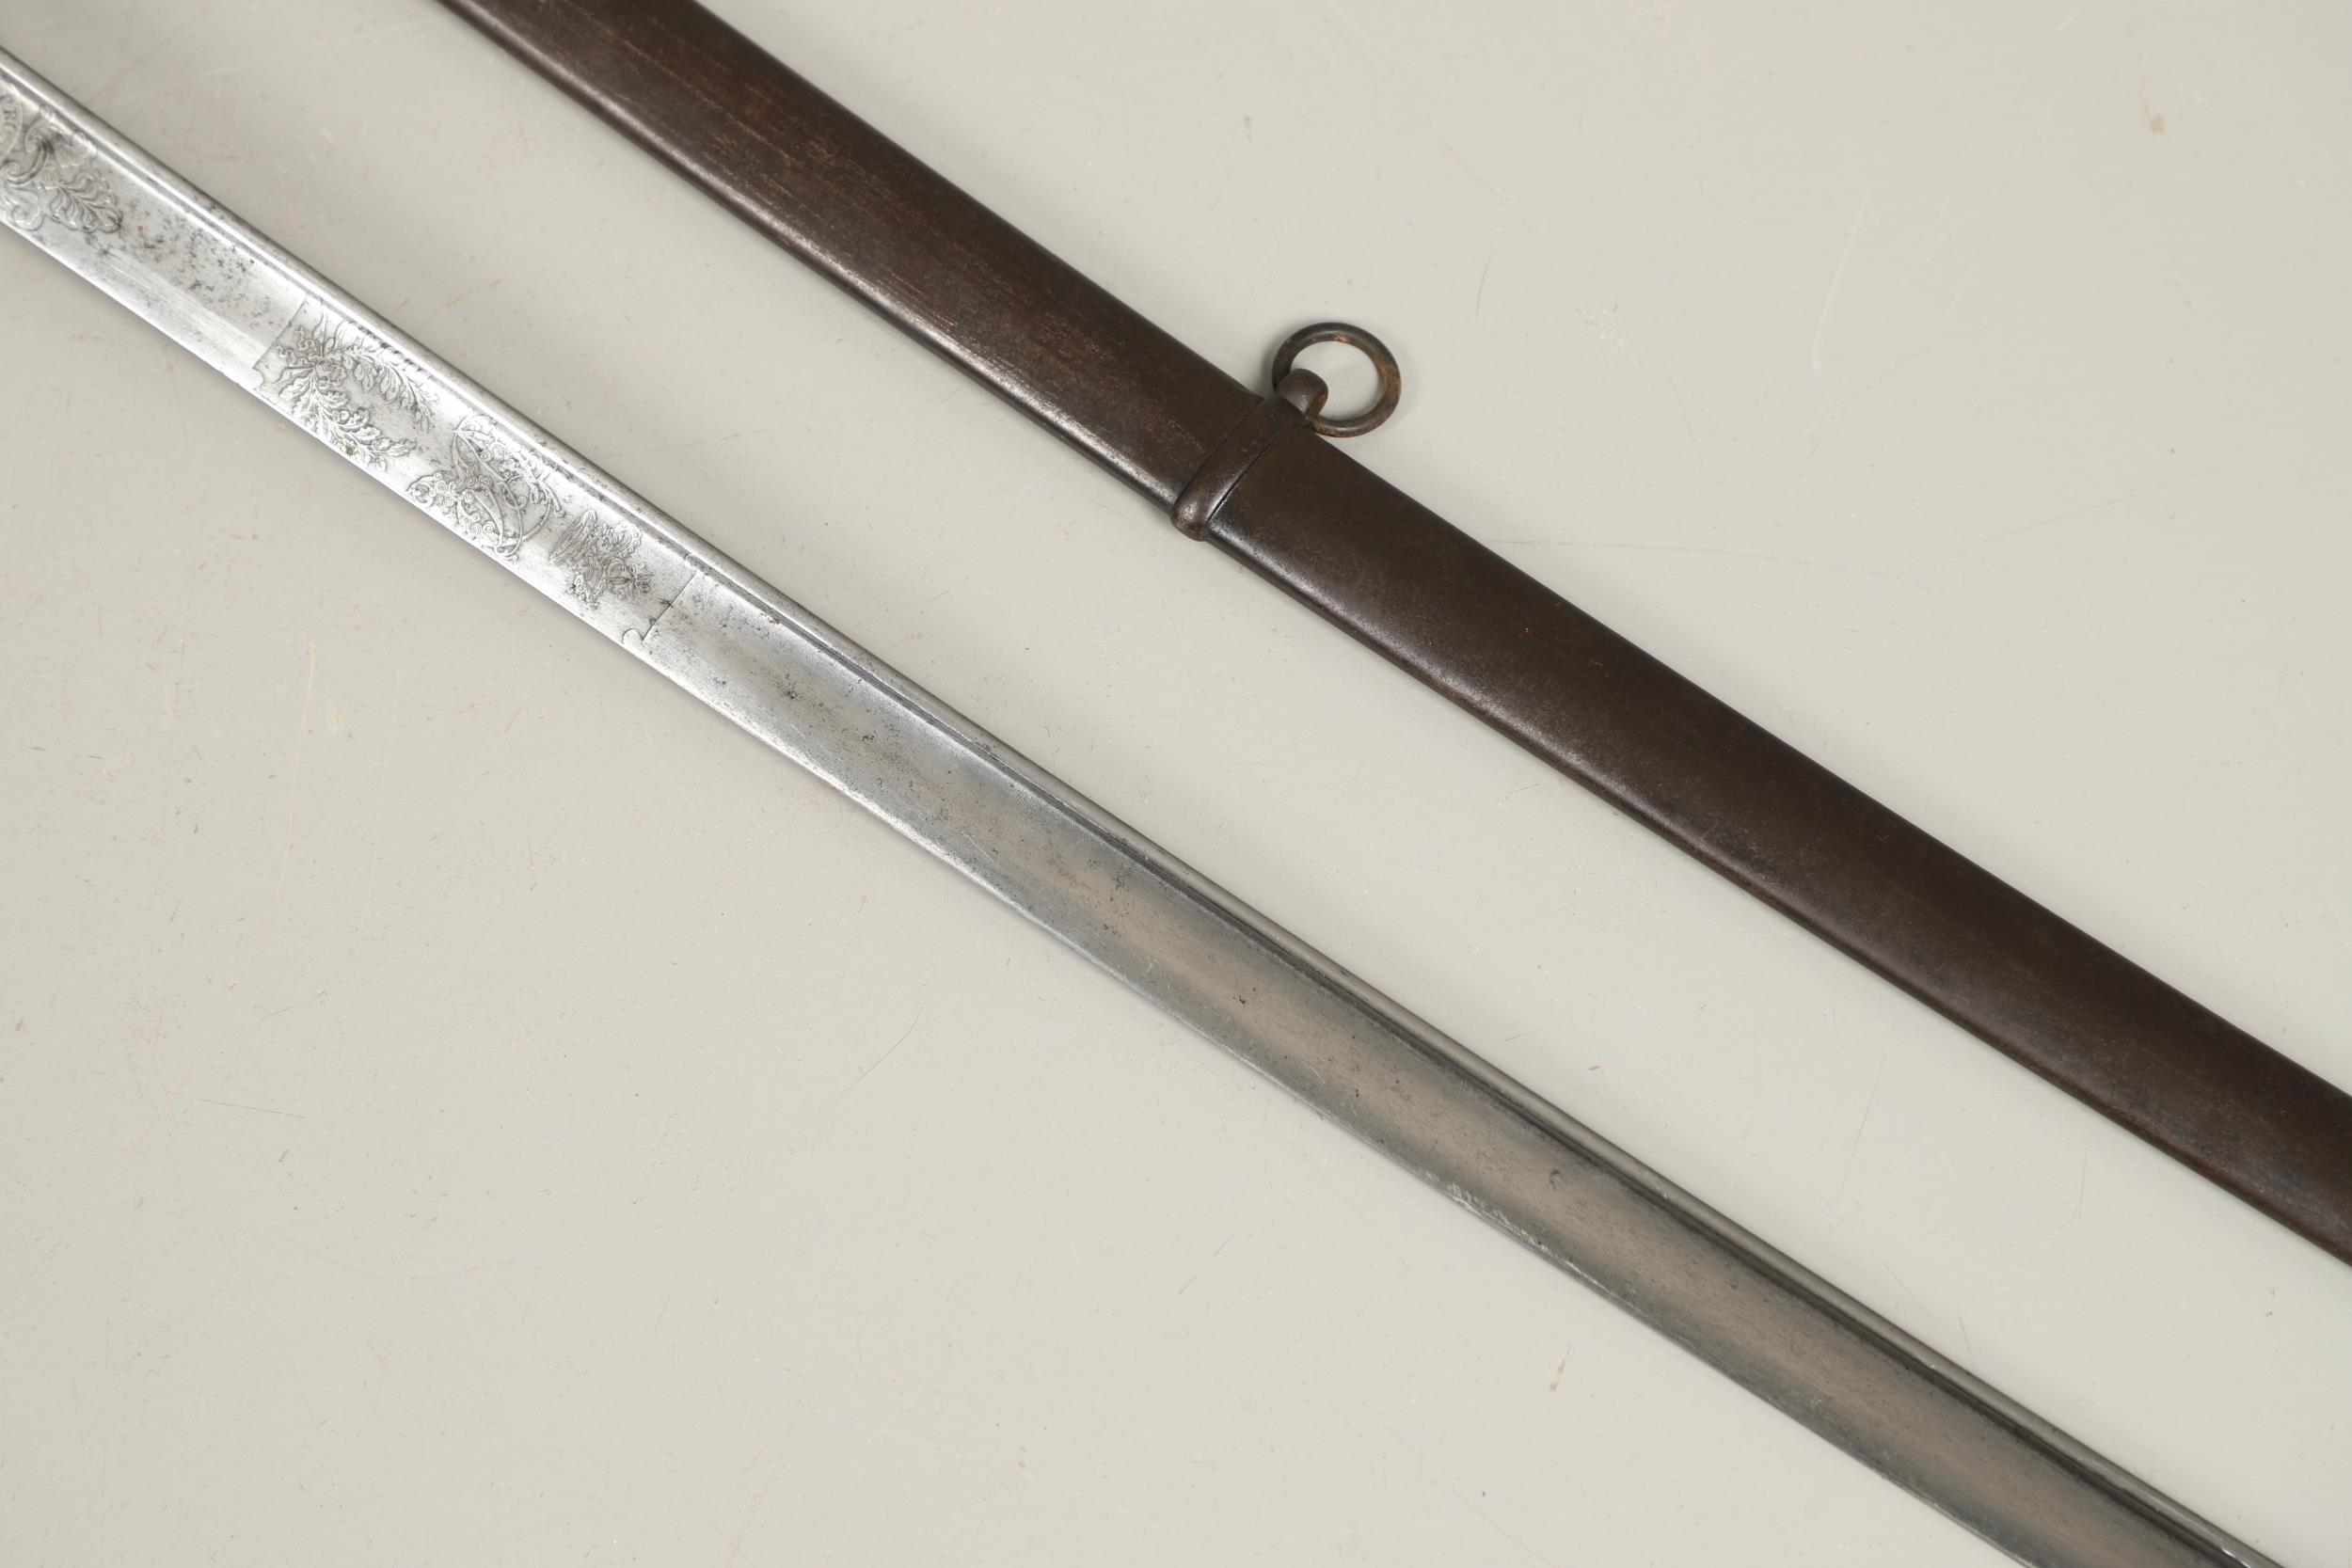 A CRIMEA PERIOD 1822 PATTERN LIGHT CAVALRY OFFICER'S SWORD AND SCABBARD. - Image 6 of 20